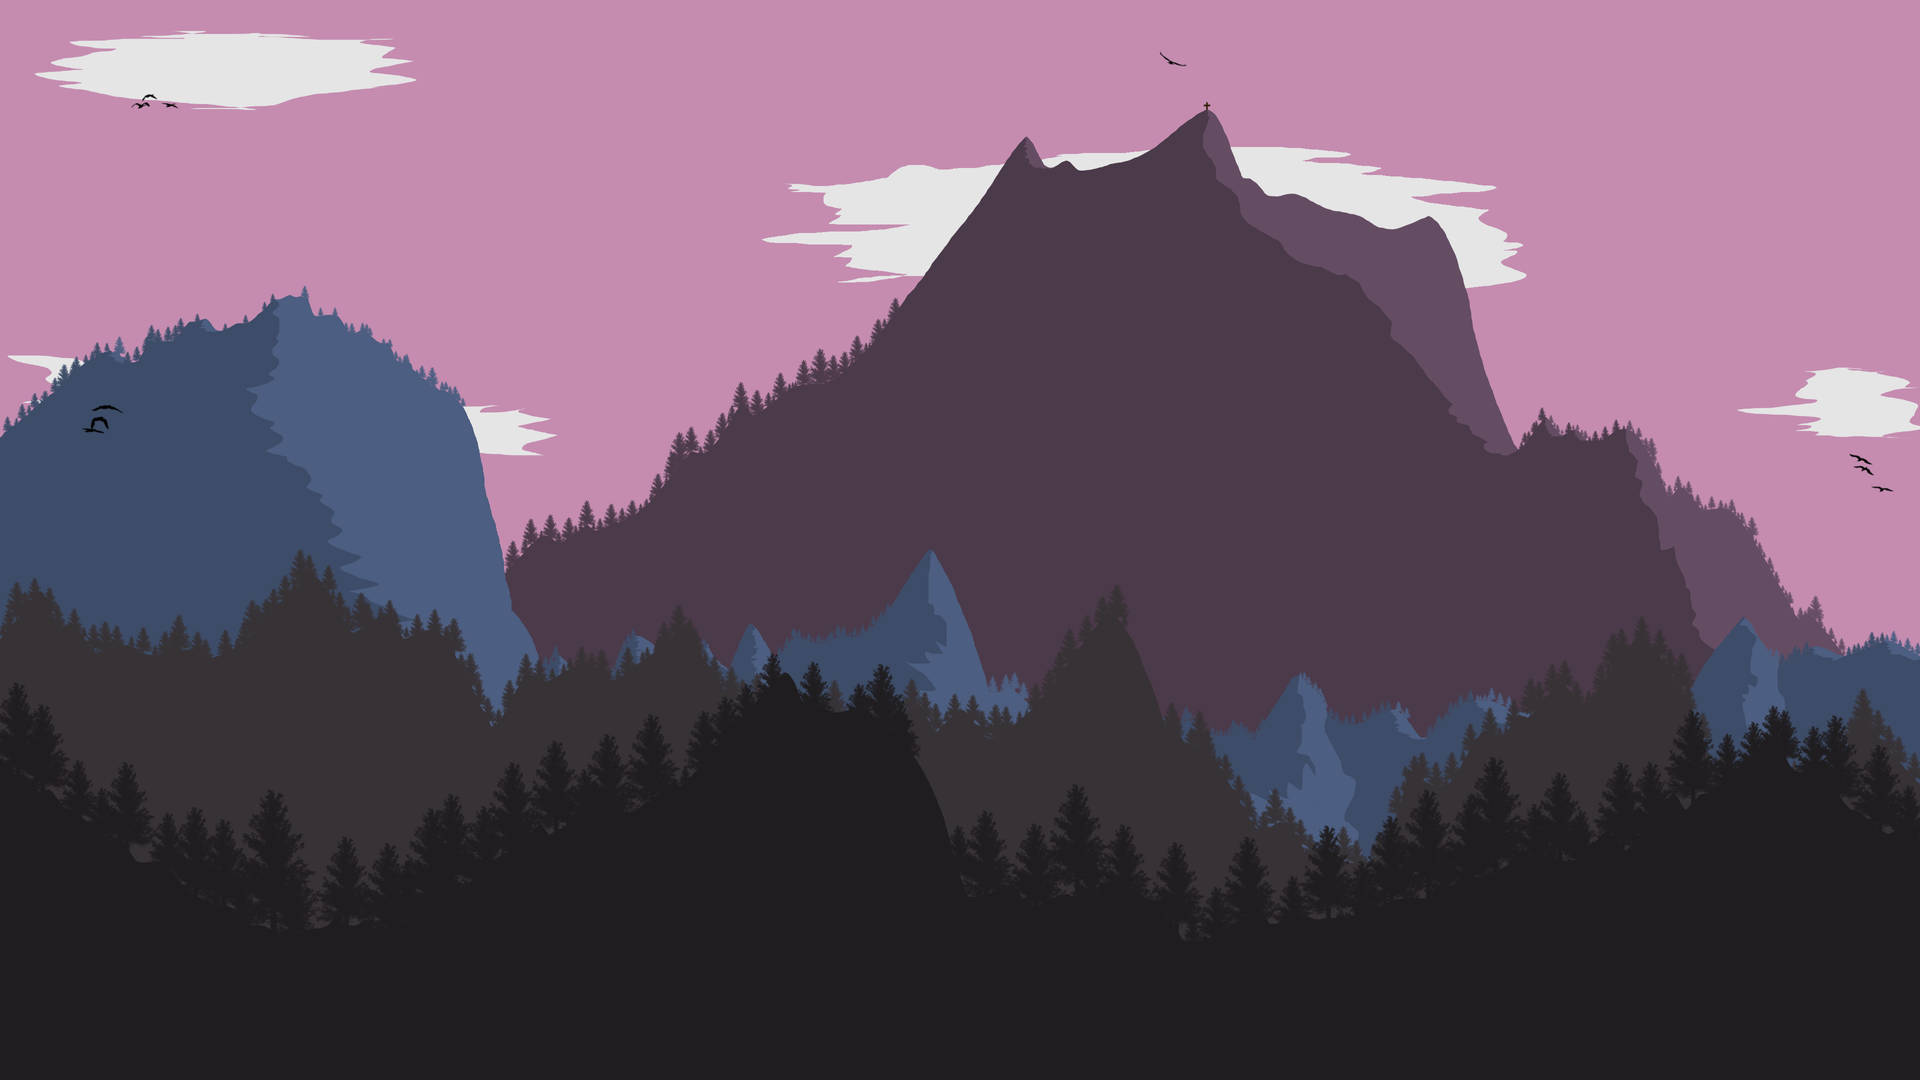 Escape into a dreamlike atmosphere featuring a forest silhouette on a pink sky. Wallpaper